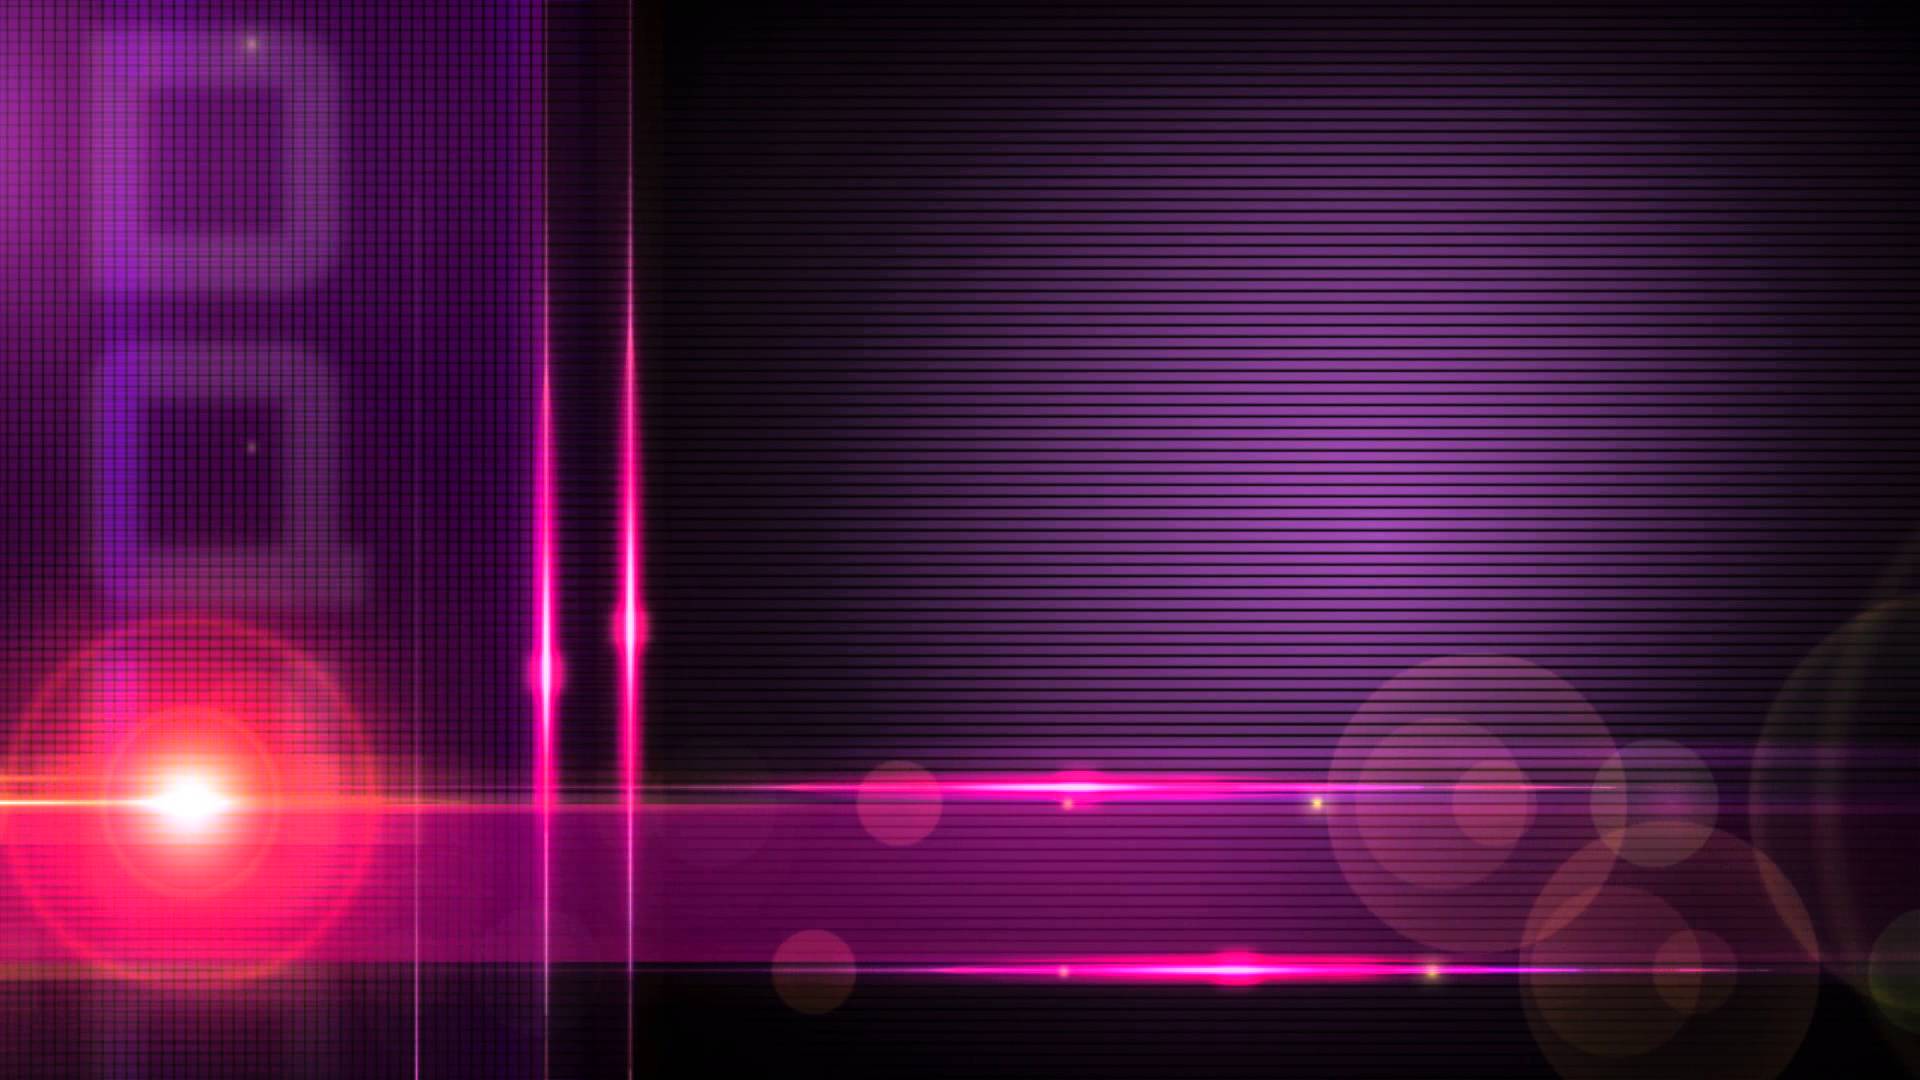 Video Background HD Proshow.org- Abstract